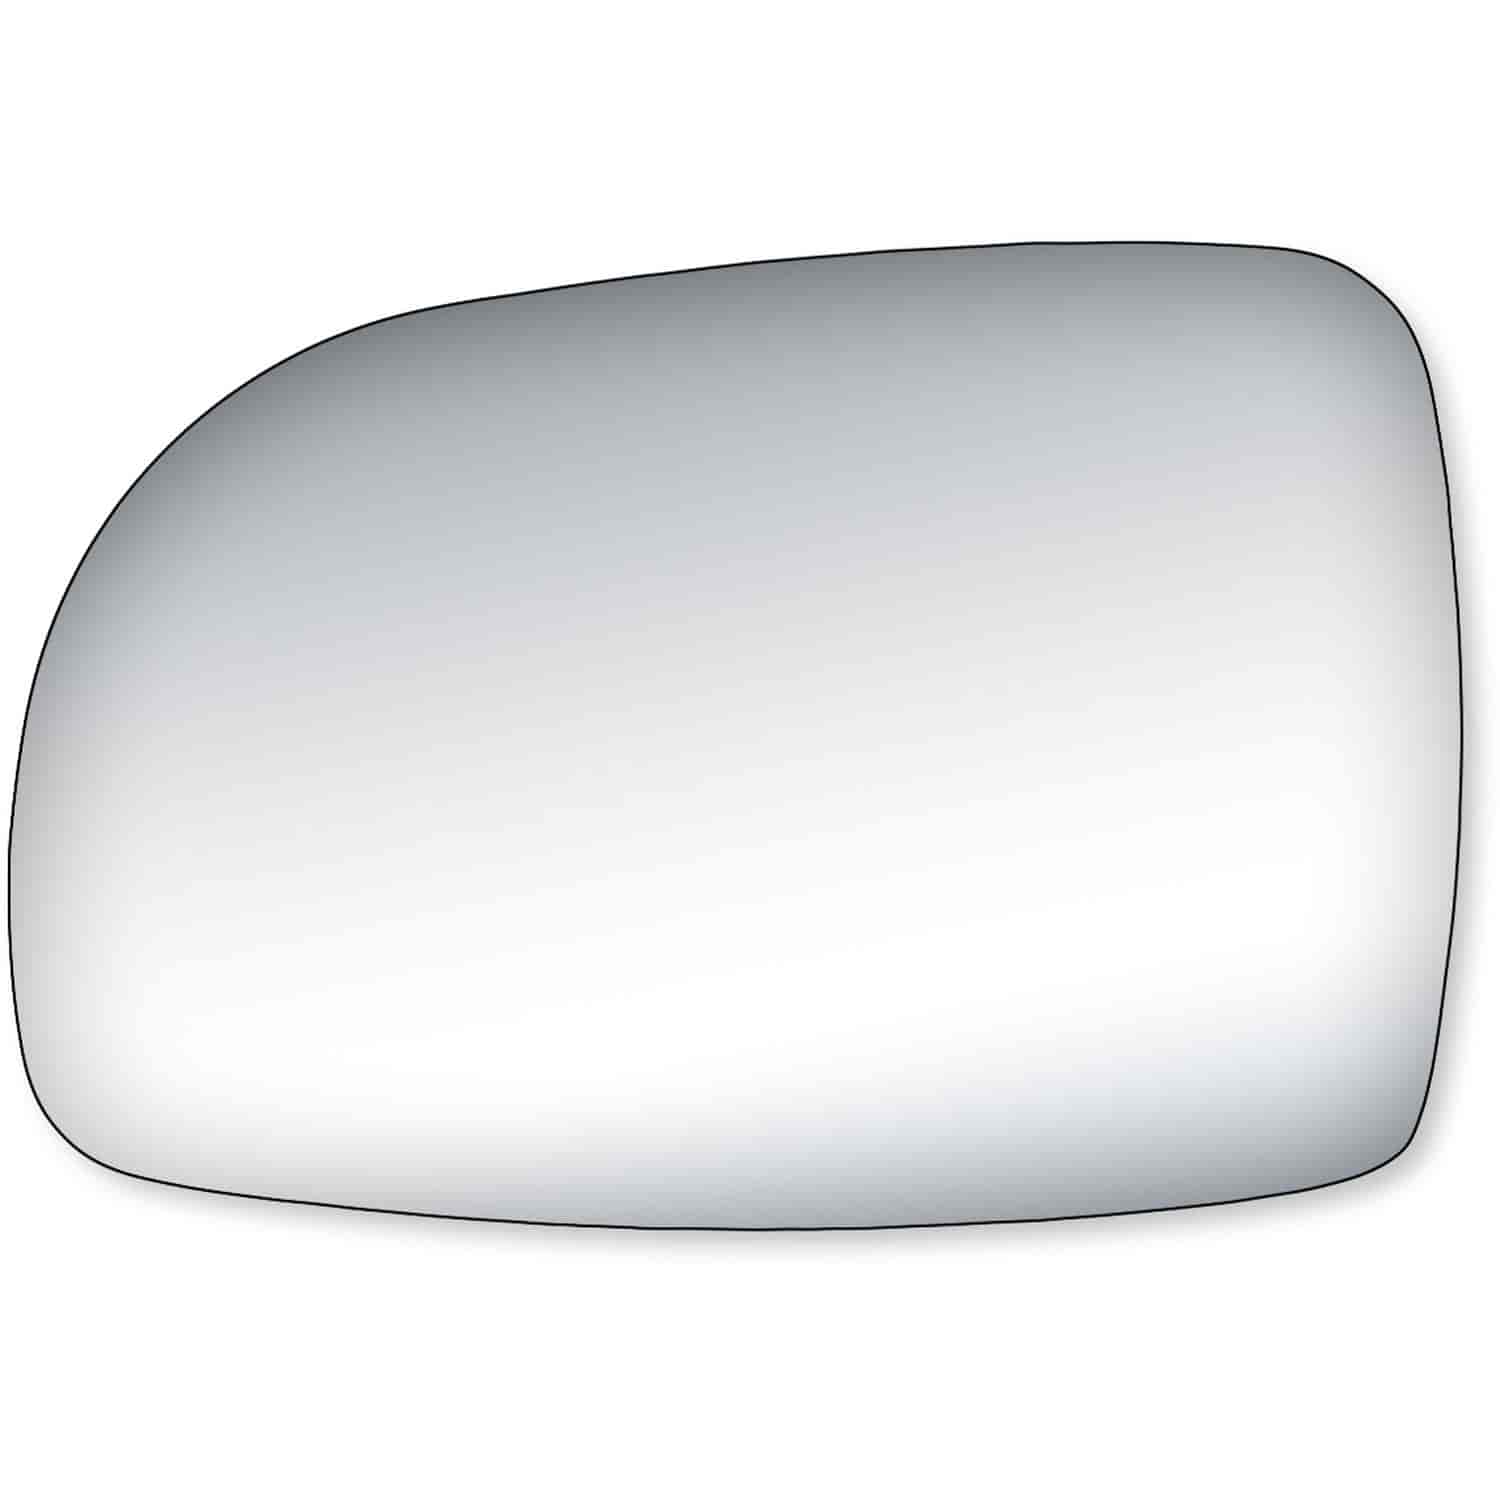 Replacement Glass for 1995-2003 Ford Windstar